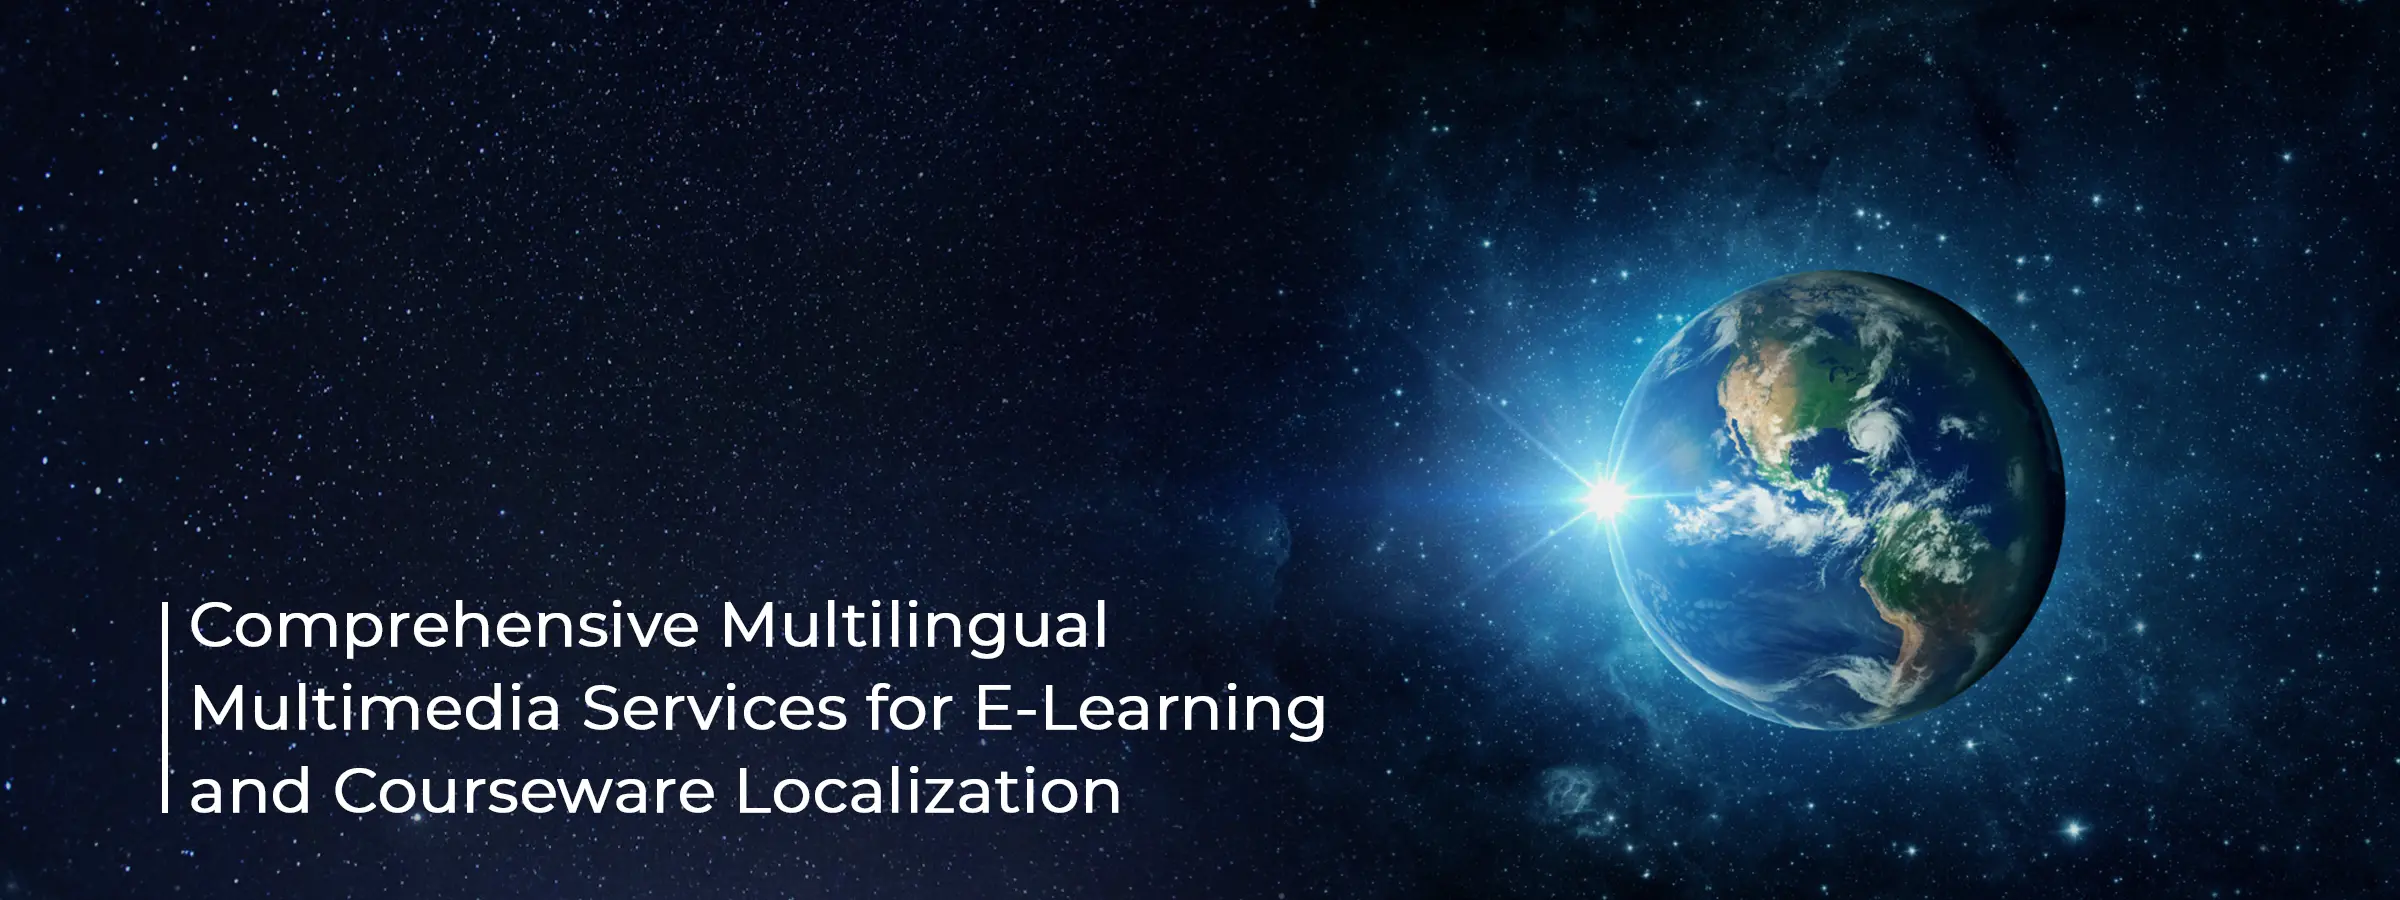 multimedia-service-for-e-learning-and-courseware-localization-industry